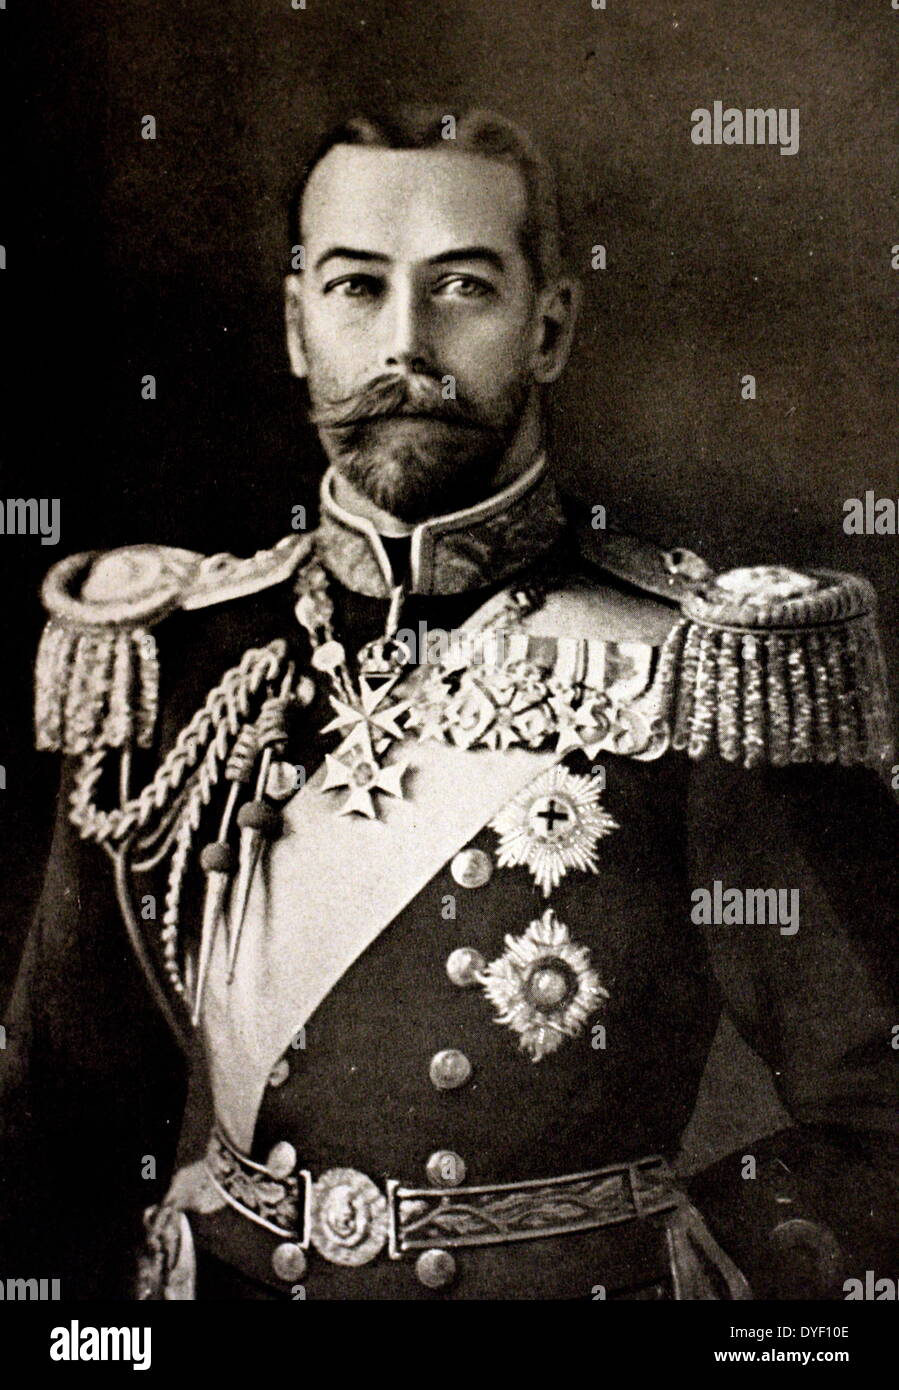 Nicholas Romanov II of Russia. The head of the last imperial family dynasty to rule Russia. Lived between 1868–1918. Stock Photo